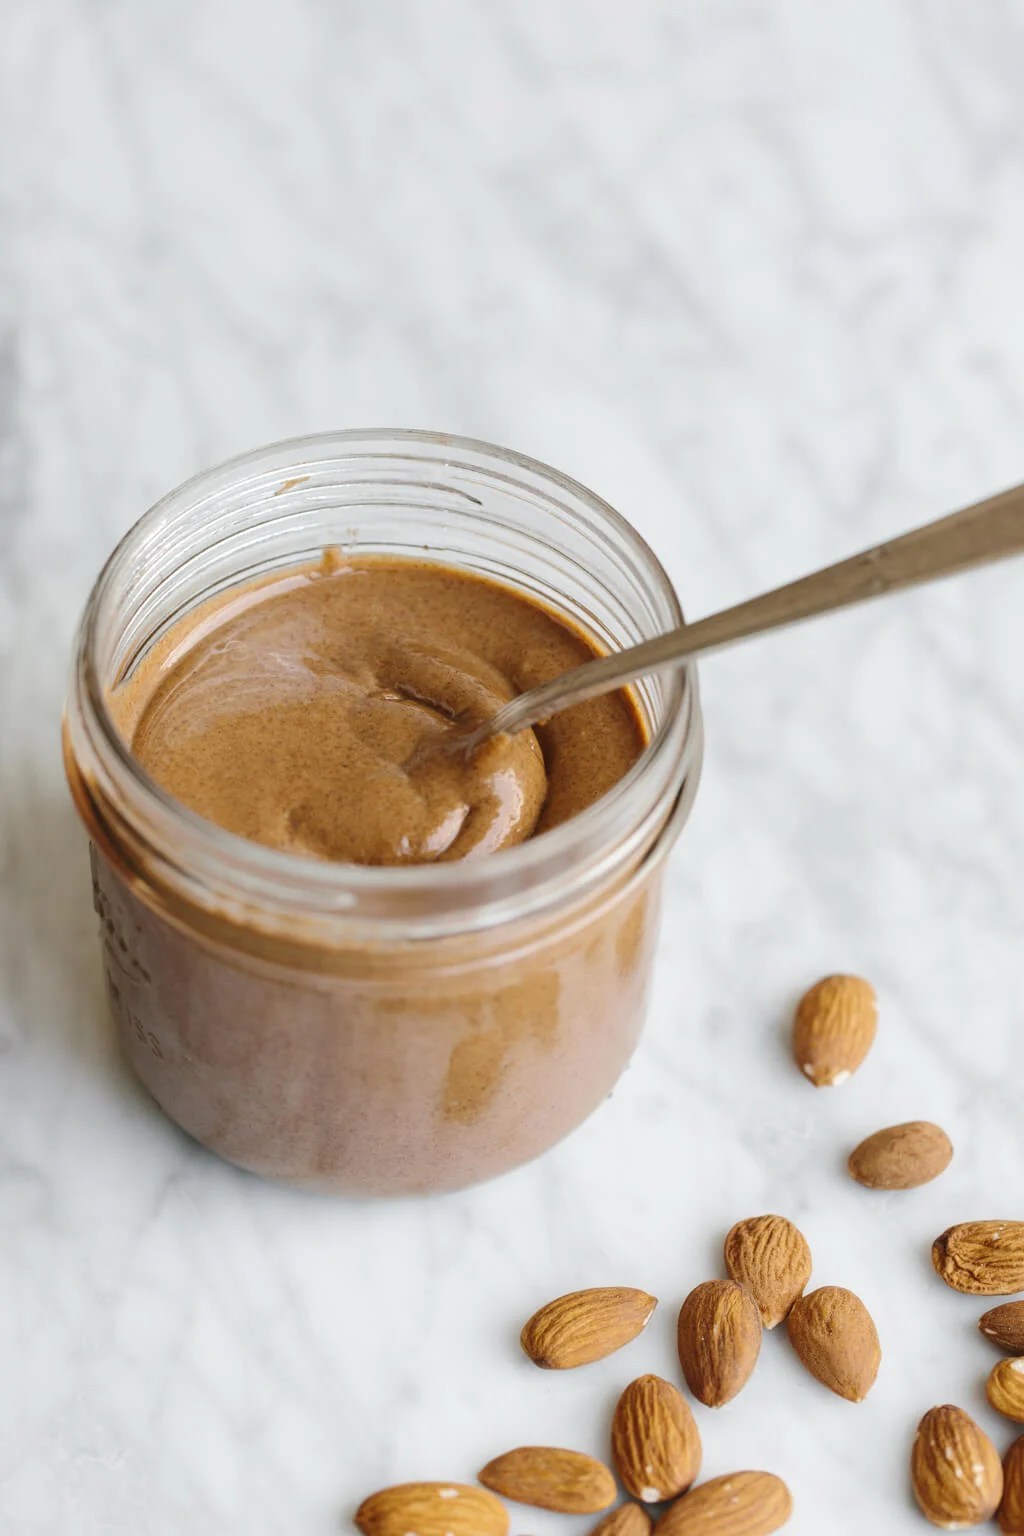 Homemade almond butter is healthy, delicious and super easy to make. It only takes one minute with a Vitamix - watch the video to see for yourself! 